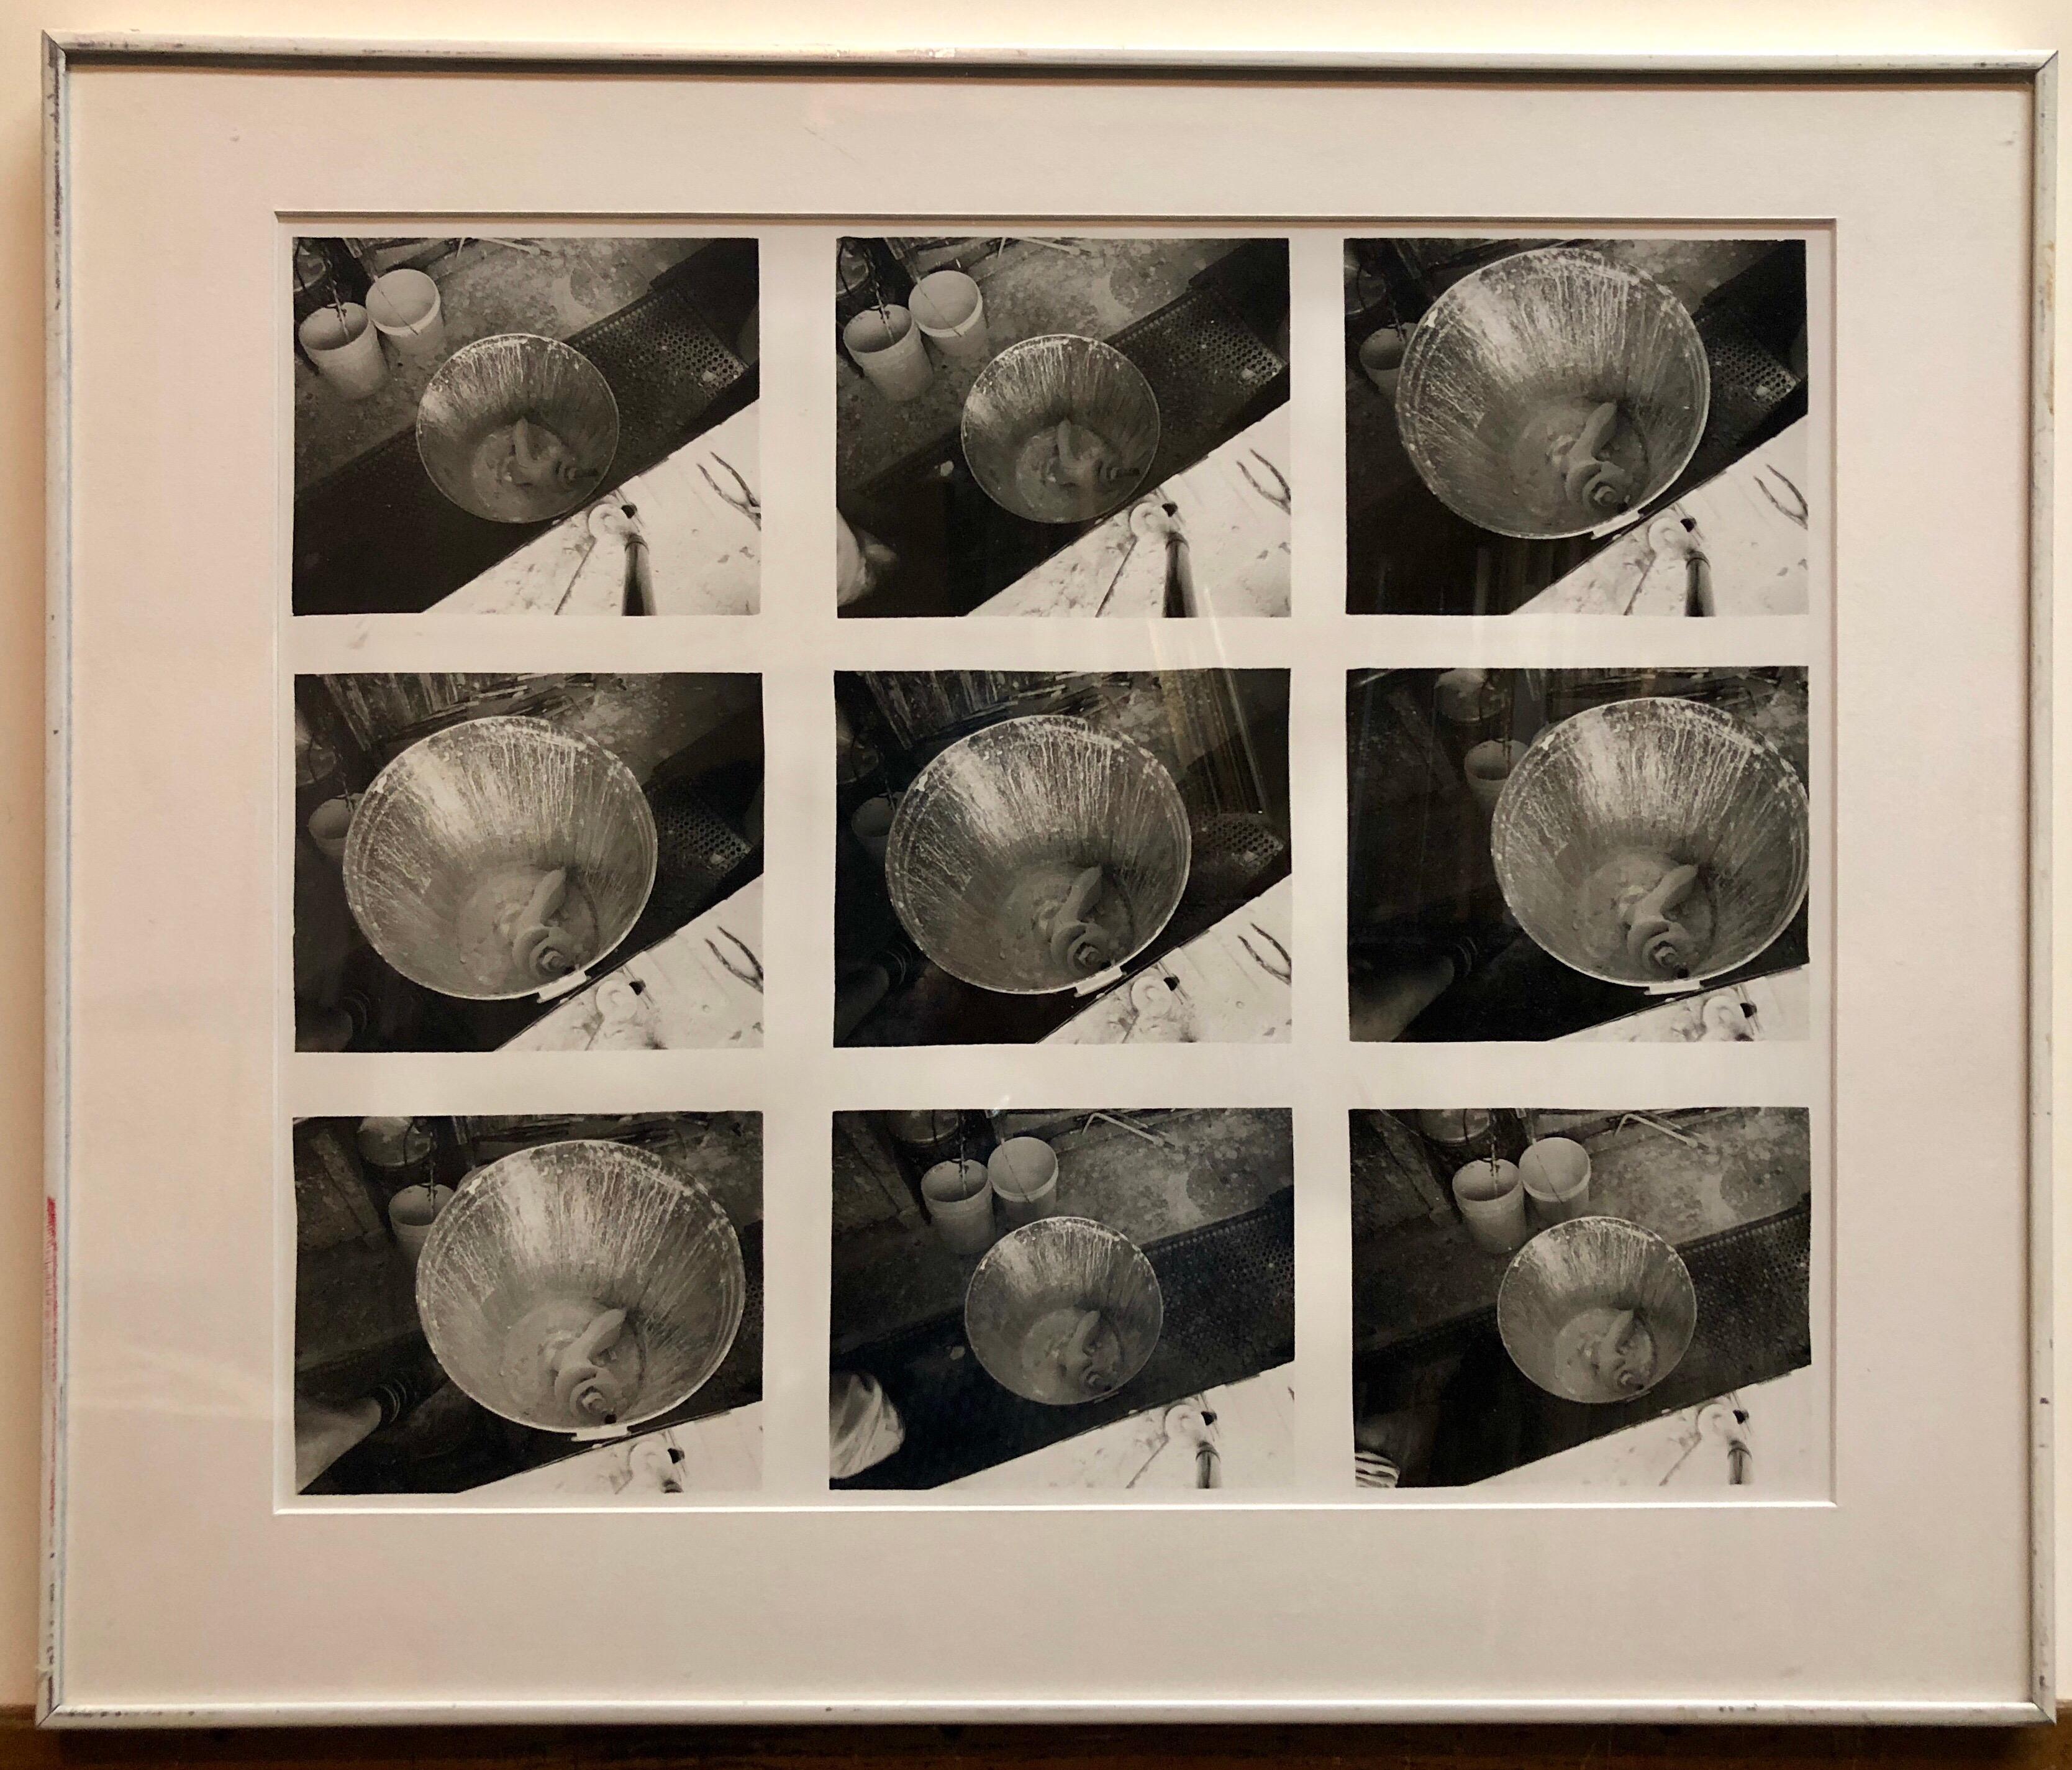 These are vintage prints from the 1980's. The last photo shows a gallery or museum label from an accompanying piece (there were three sequence shots in this series) but is not on this piece. They look like contact sheets or film strips. There is no